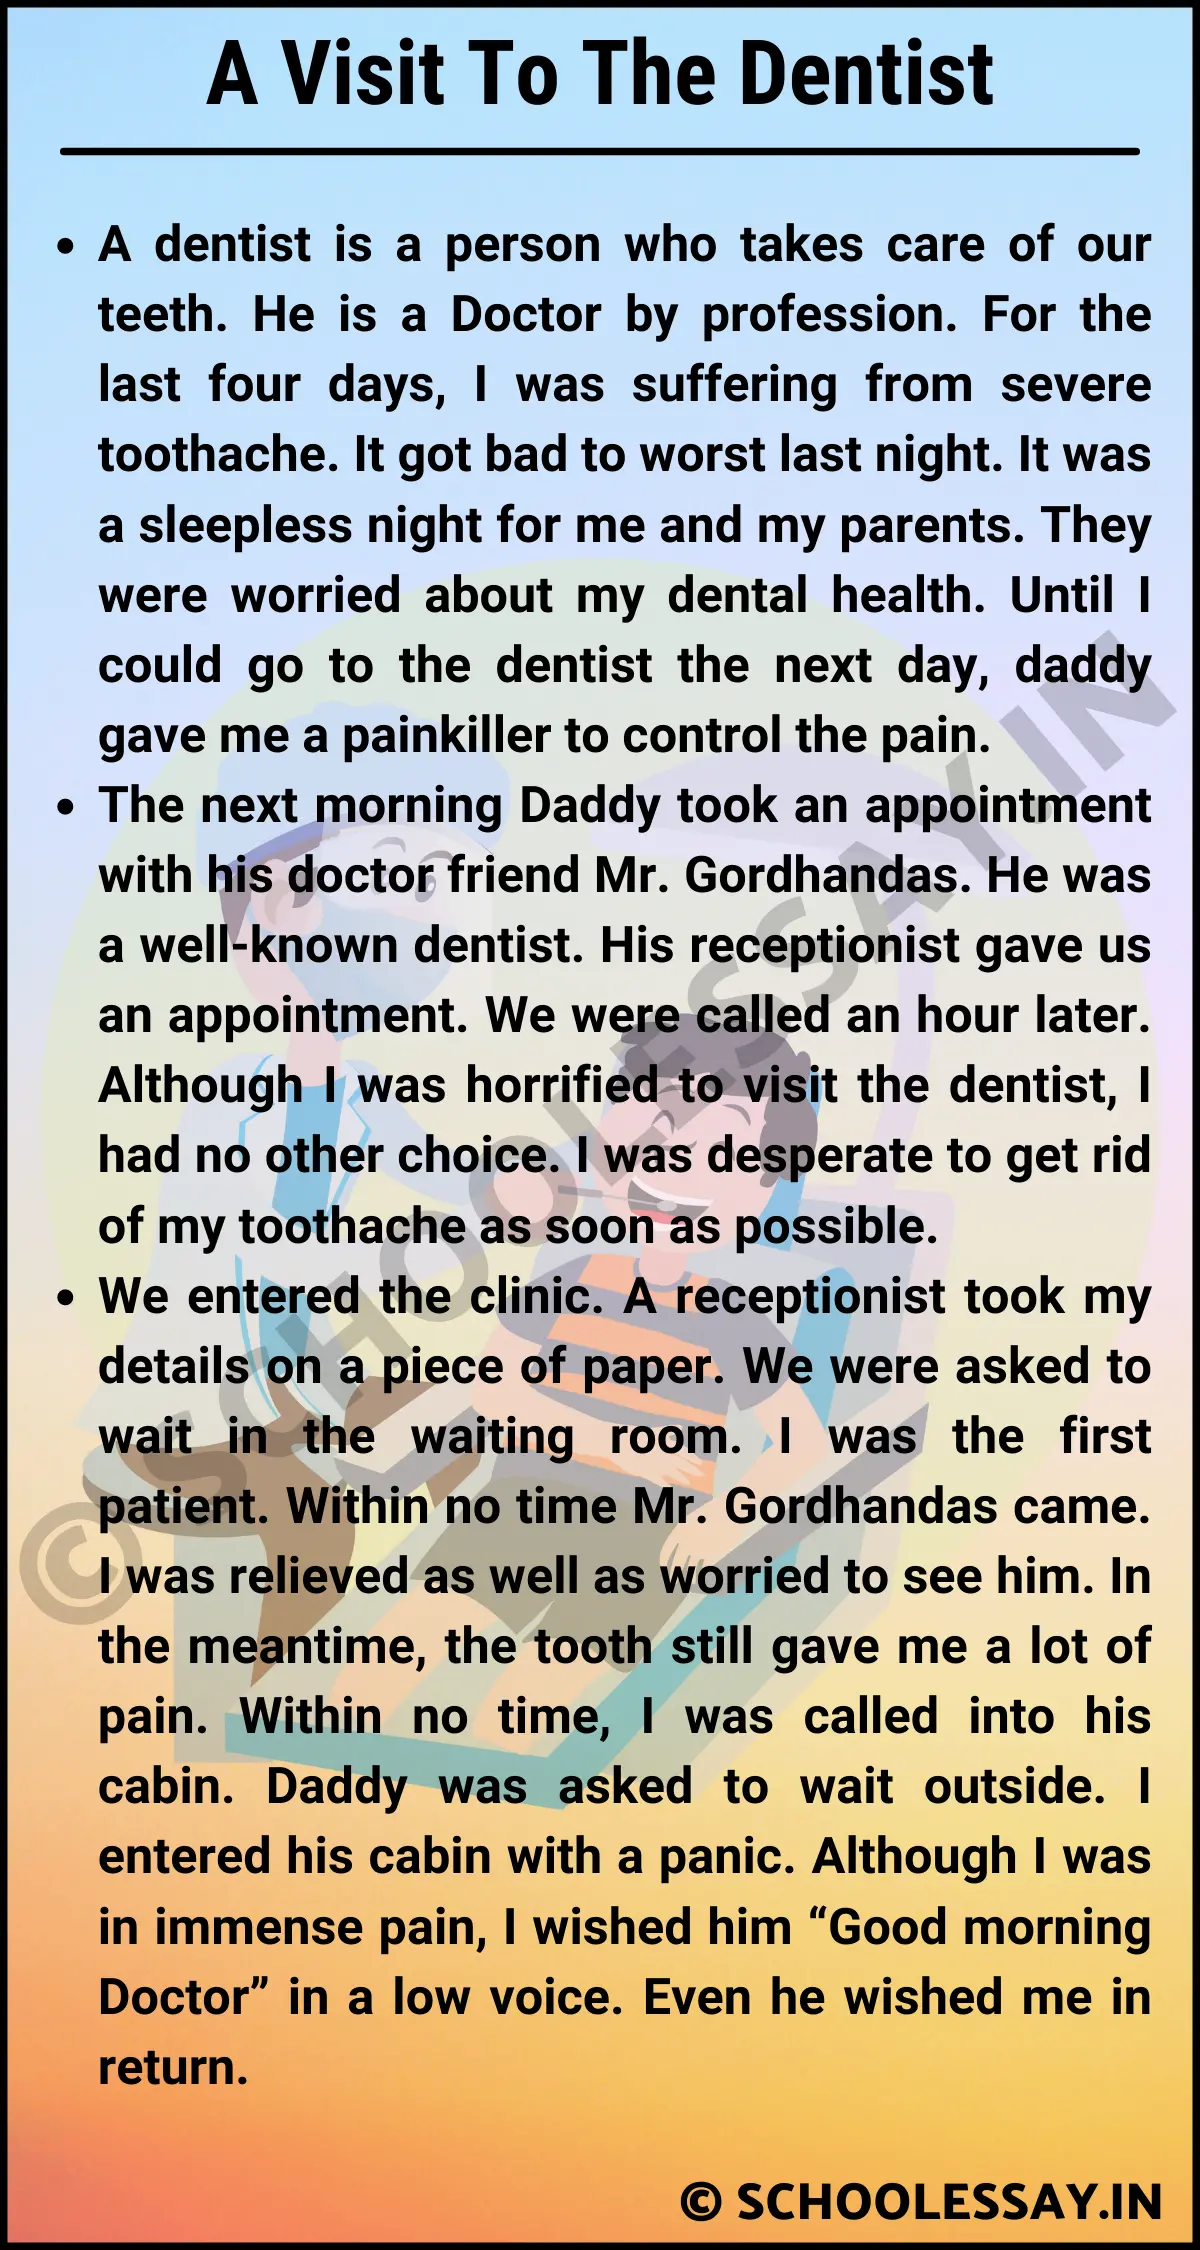 Essay on A Visit To The Dentist